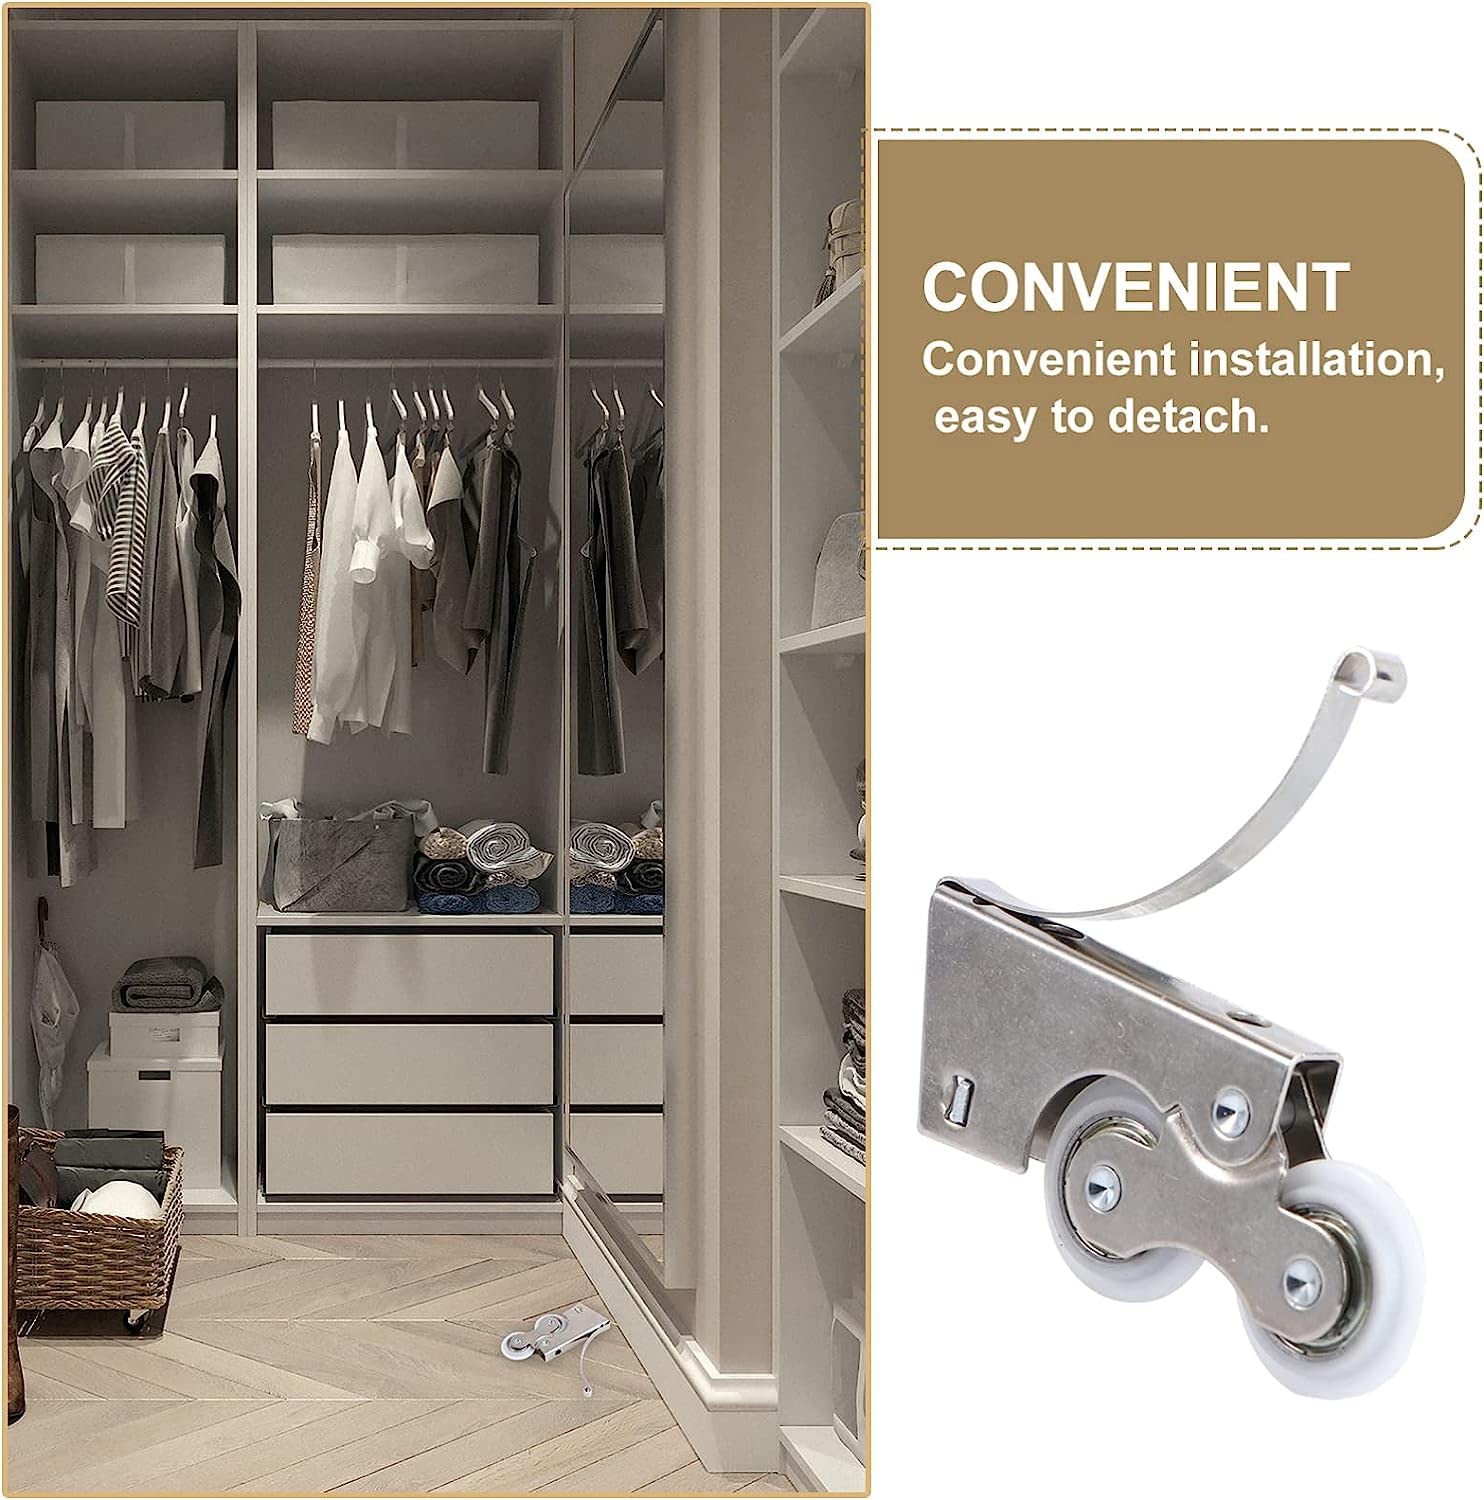 💥Manufacturers Clear Inventory And Sell At A Loss💥Sliding Door Pulley Wardrobe Wheel👇👇👇